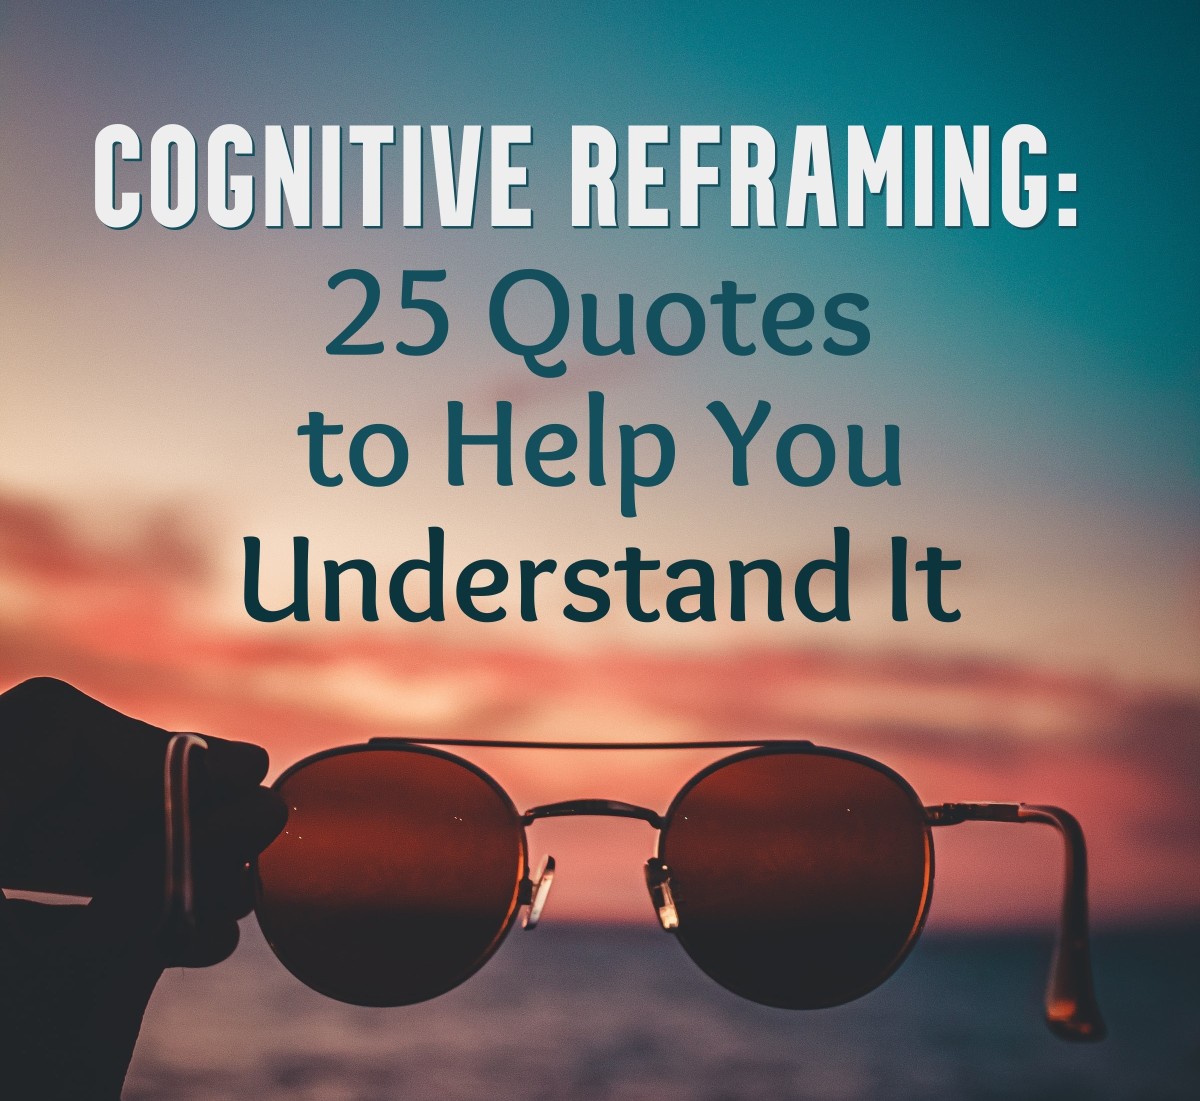 Cognitive Reframing: 25 Quotes to Help You Understand It